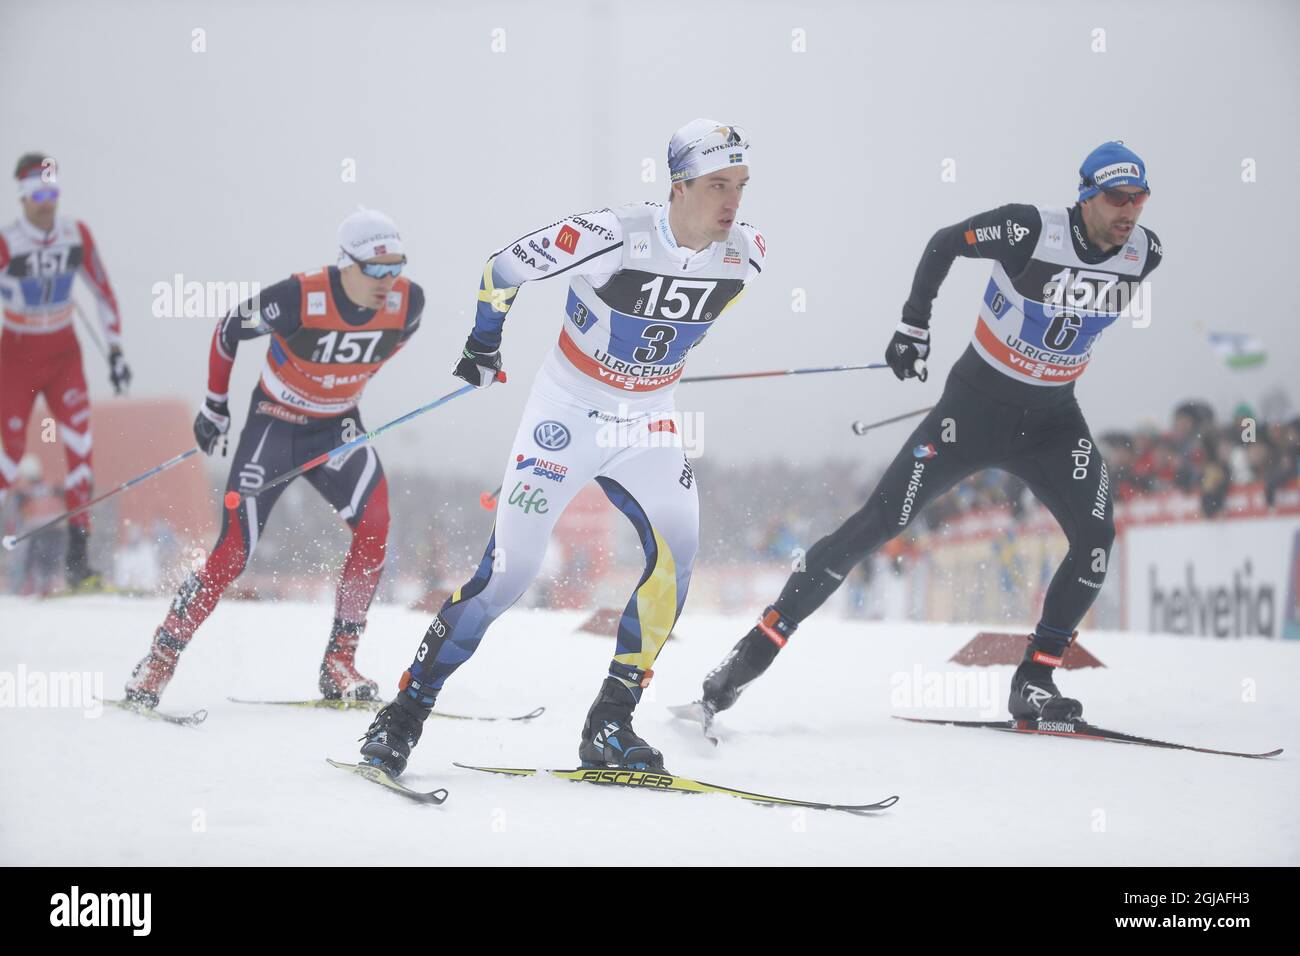 Sweden's Calle Halfvarsson (L) and Curdin Perl (R) of Switzerland during  men's relay 4x7,5 km competition at the FIS Cross Country skiing World Cup  event in Ulricehamn, Sweden, 22 January 2017. Photo: